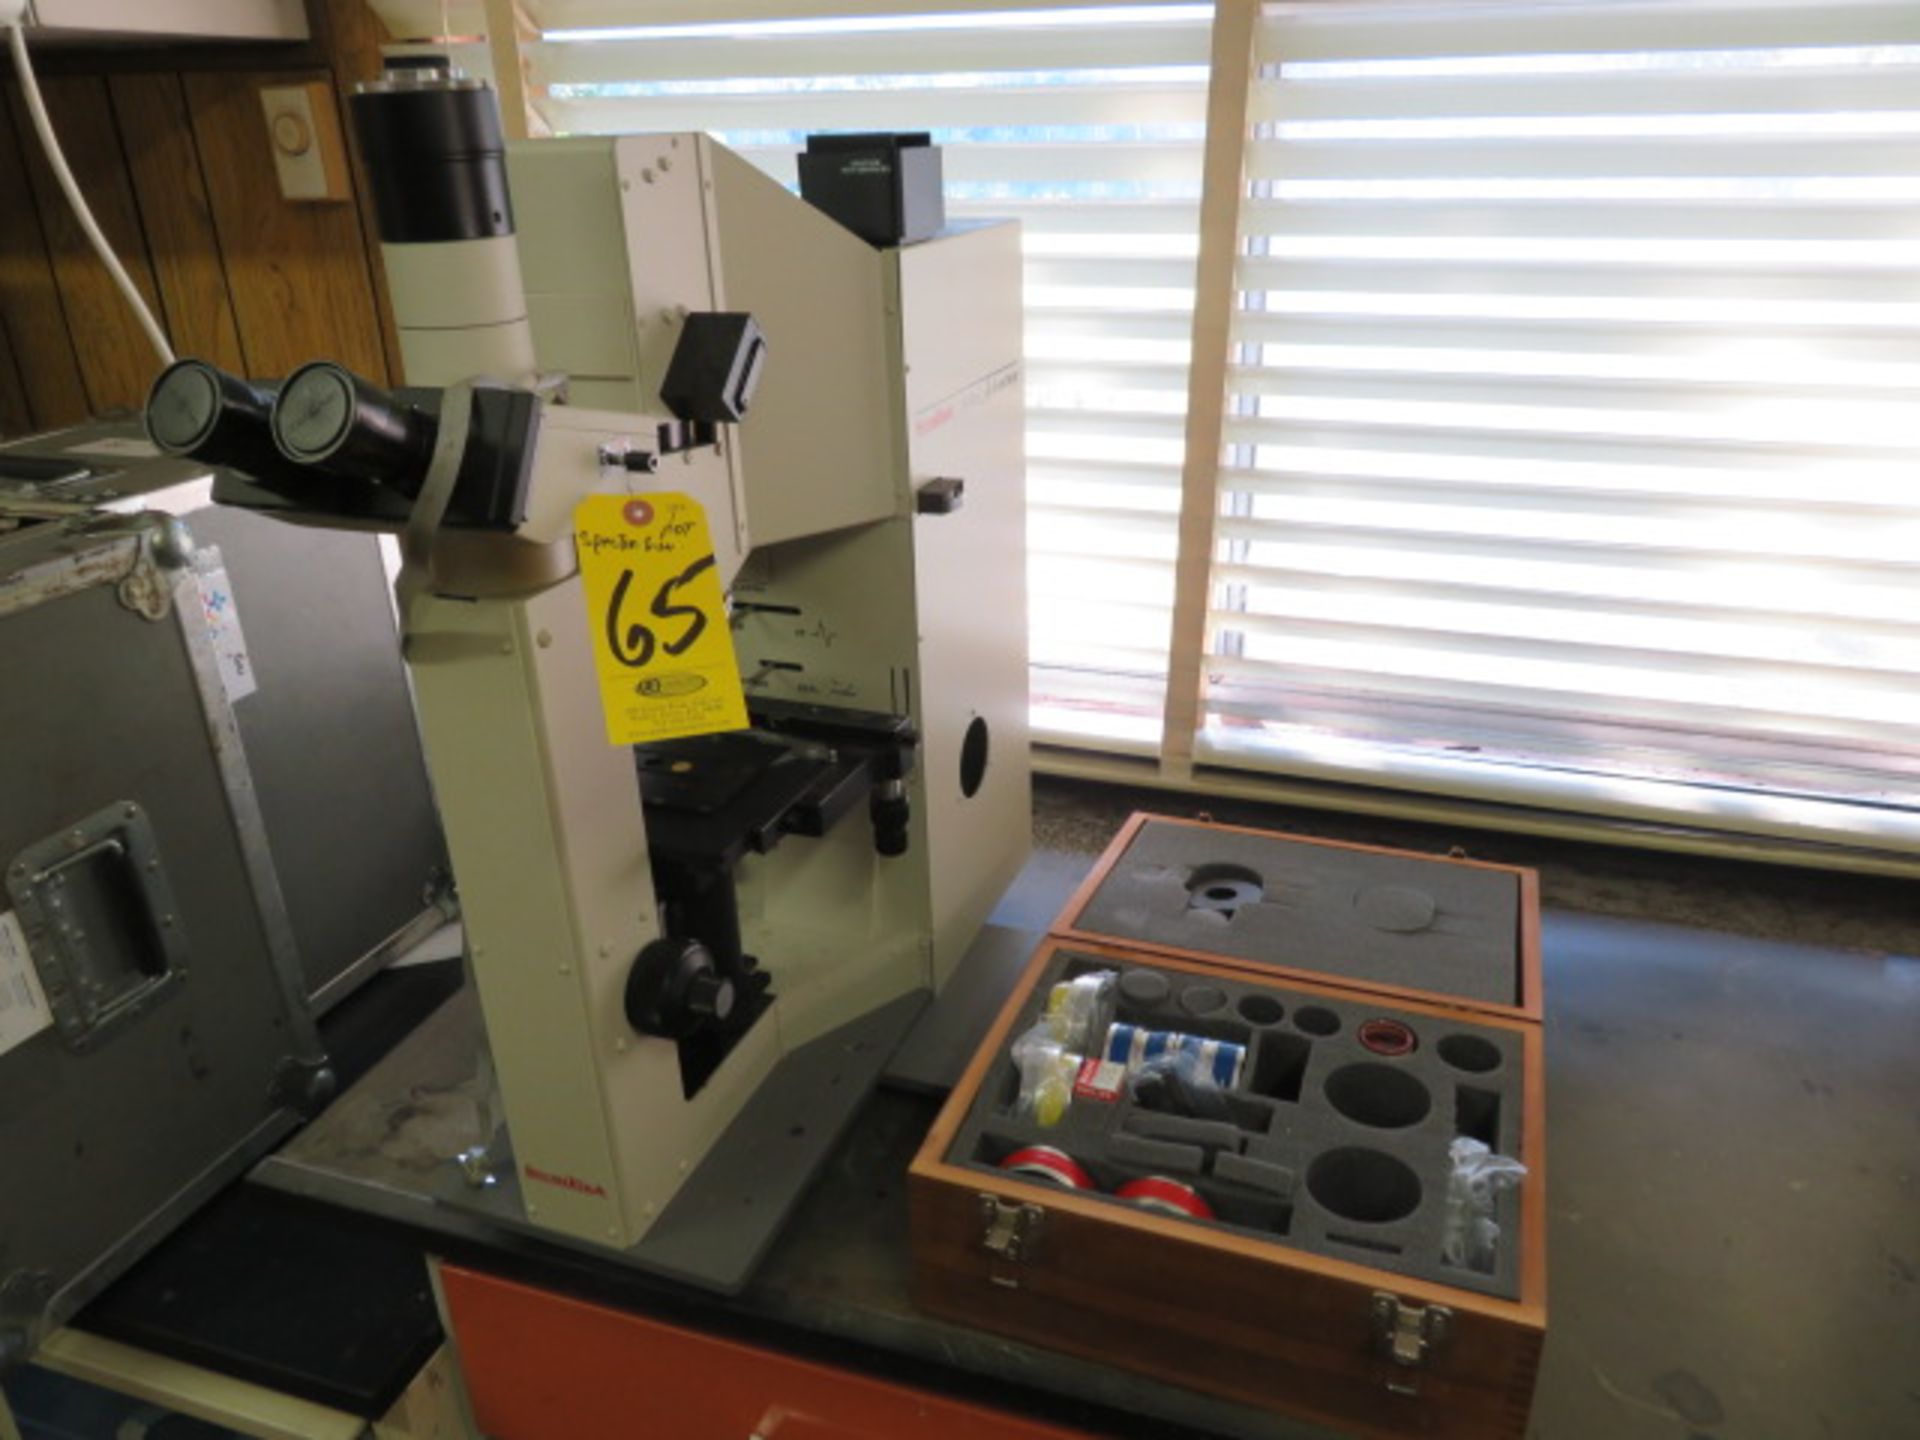 SPECTRATECH INFRA-RED PLAN ADVANTAGE, MDL. 912A0366, ANALYTICAL MICROSCOPE